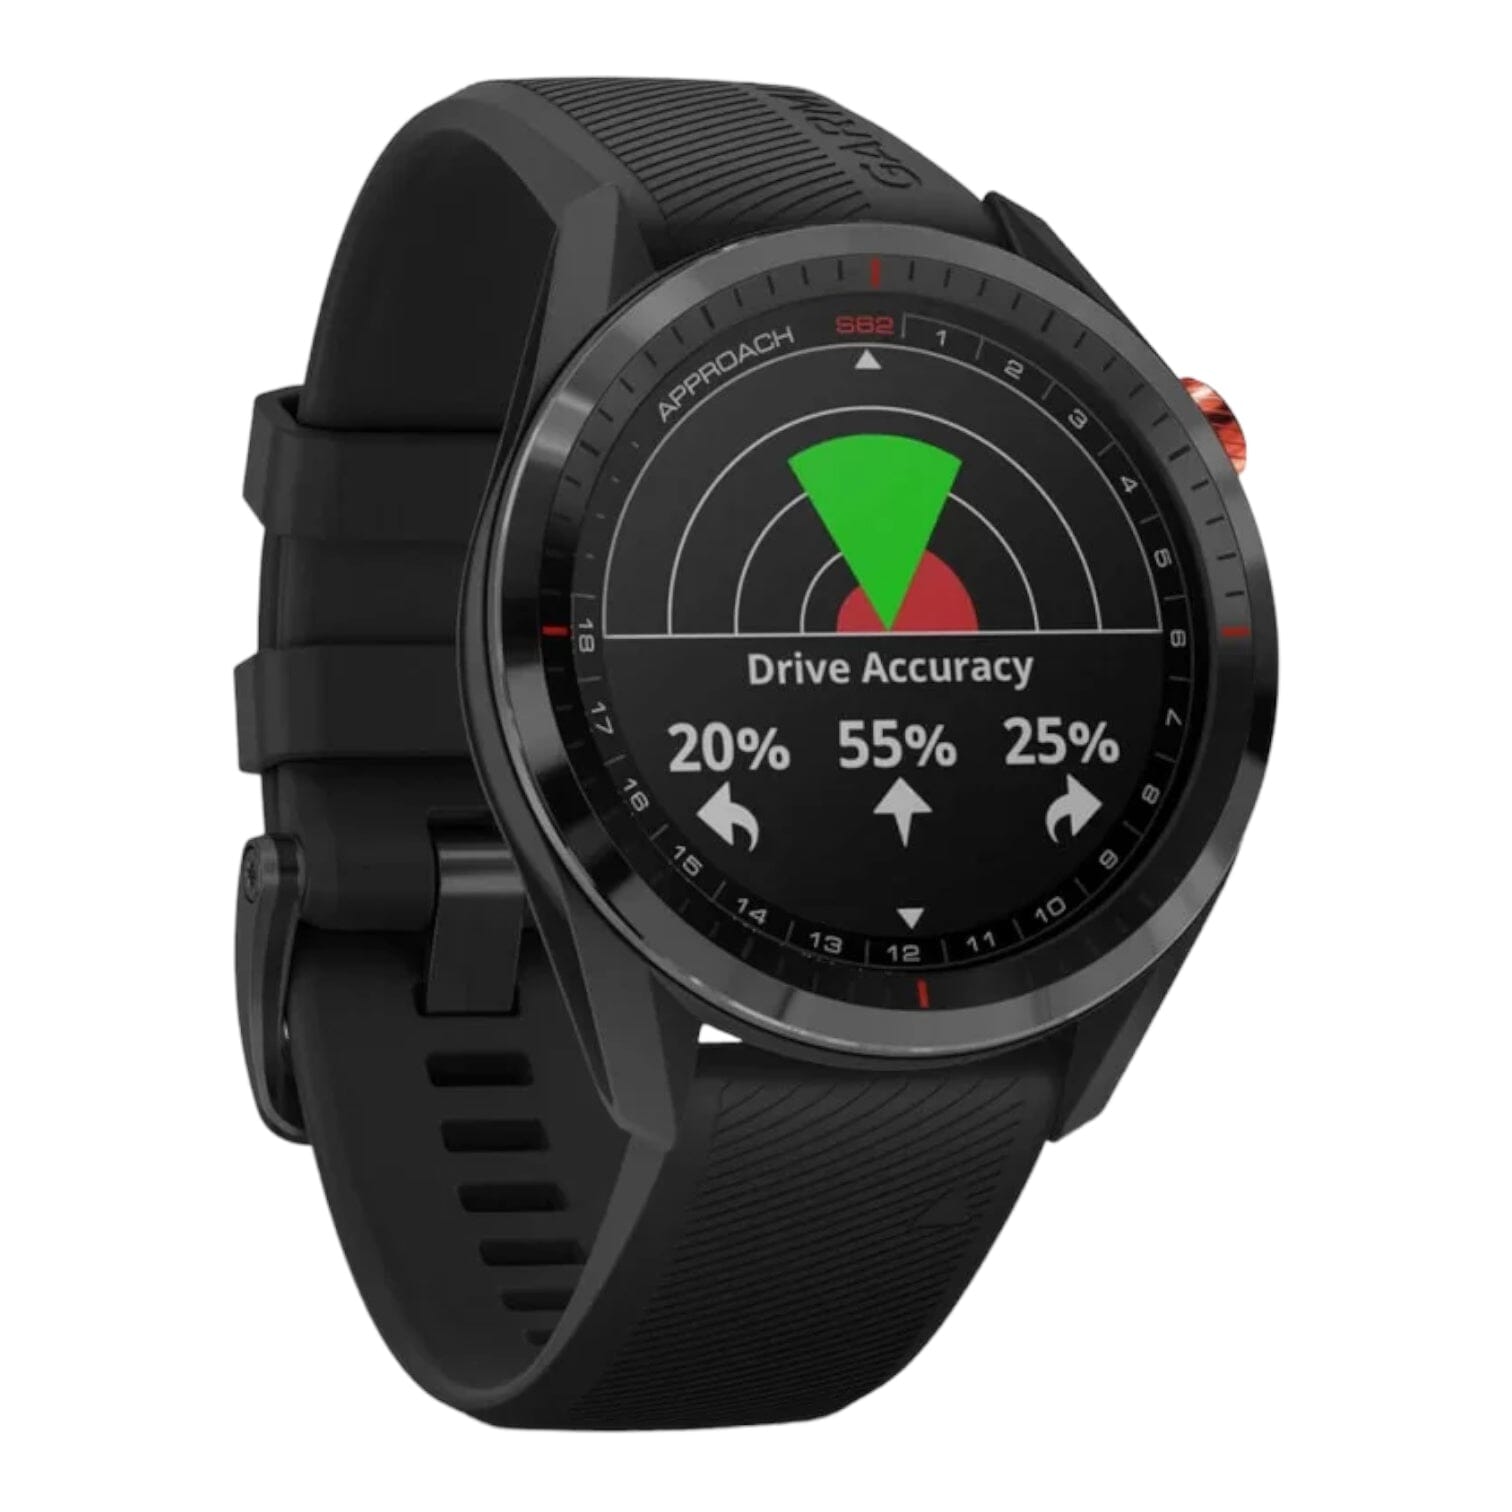 What model Garmin Approach do I have?